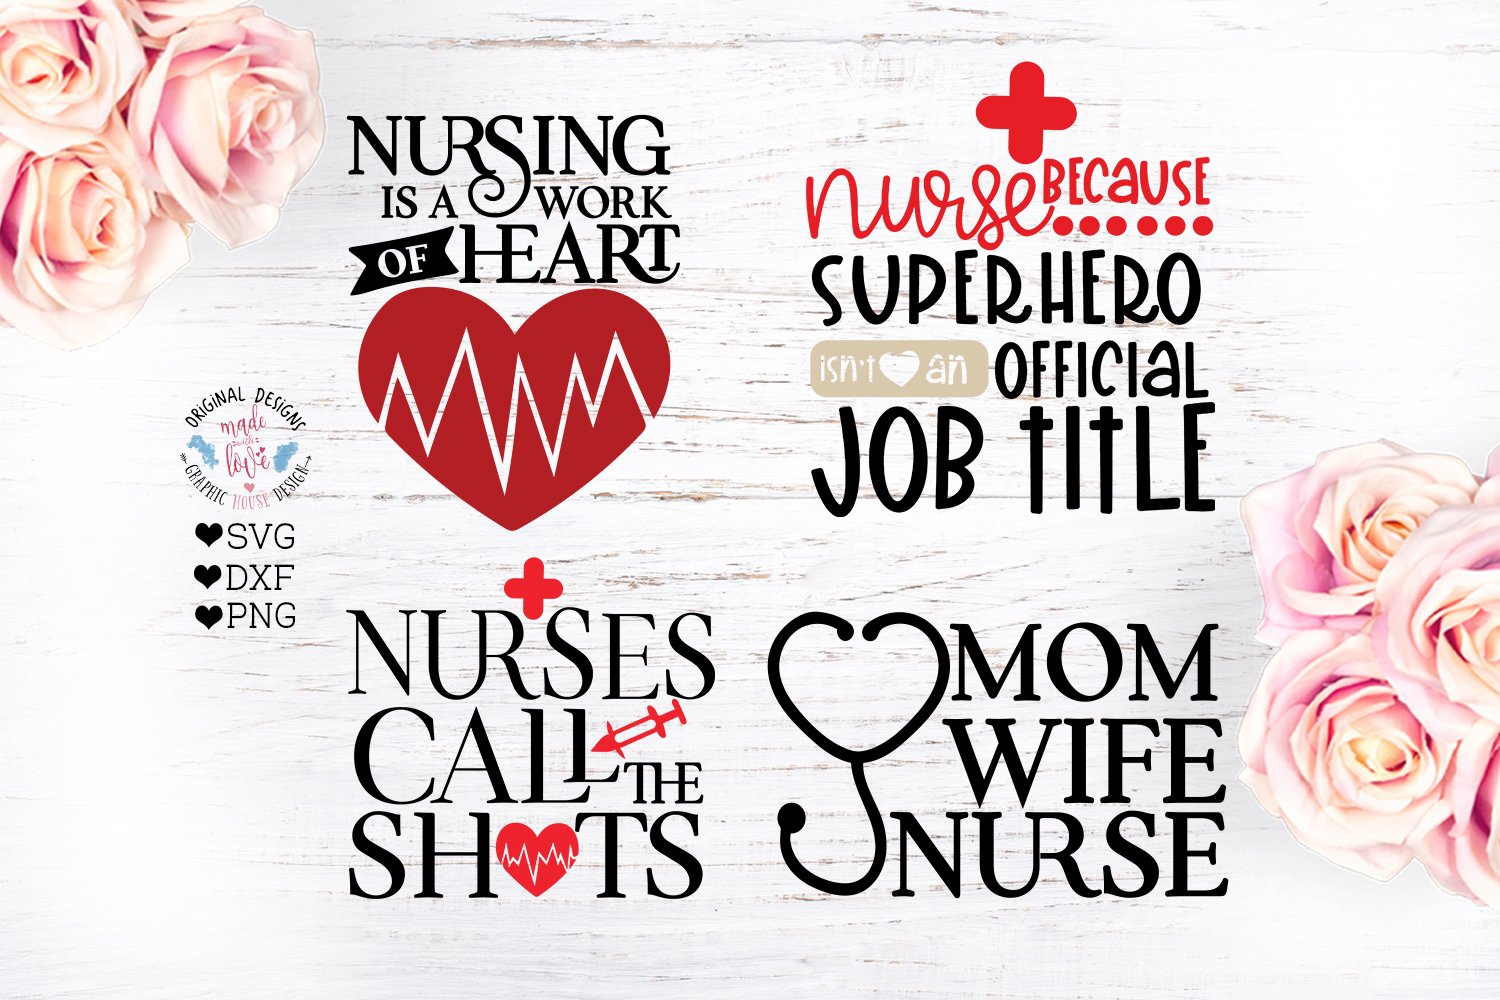 Nursing Quotes with various elements.